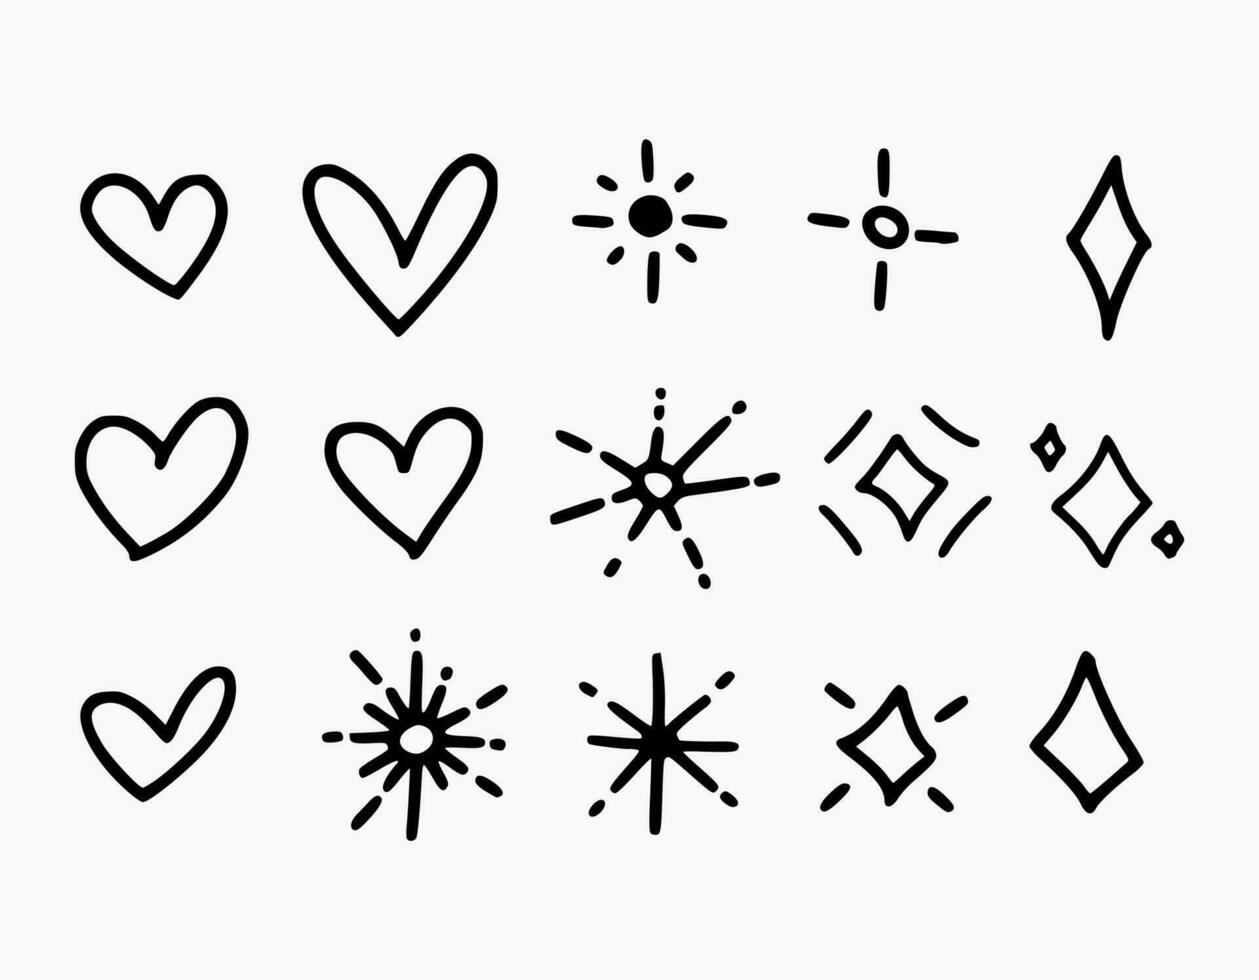 Set of hand drawn hearts, diamonds, lights. Simple hand drawn doodle elements isolated on white background. Signs and symbols with scribble style. vector